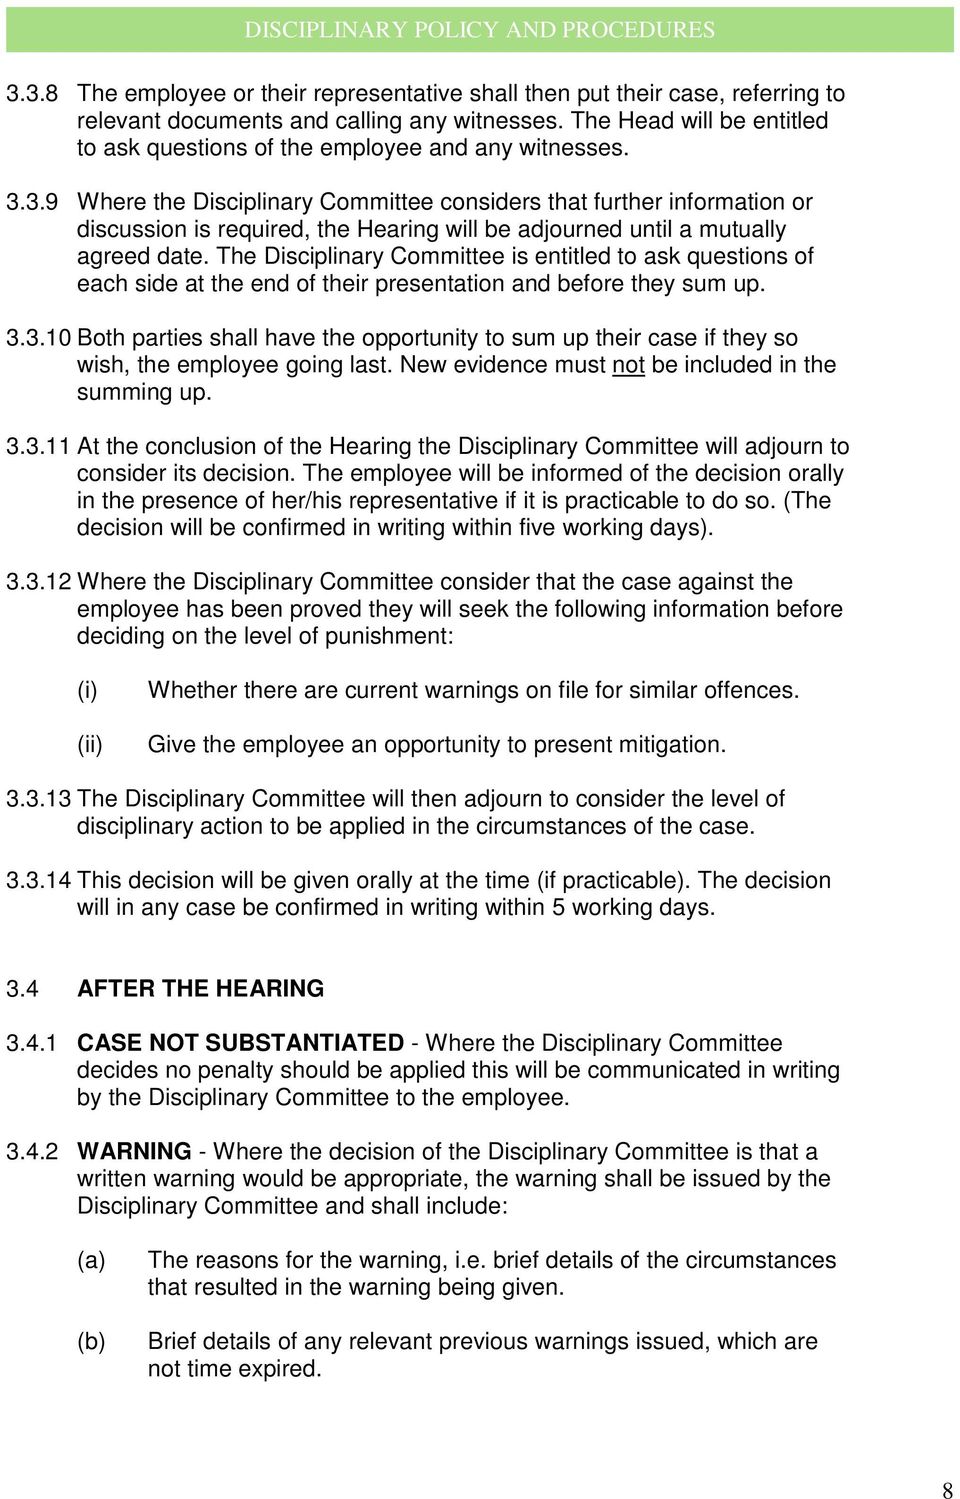 3.9 Where the Disciplinary Committee considers that further information or discussion is required, the Hearing will be adjourned until a mutually agreed date.